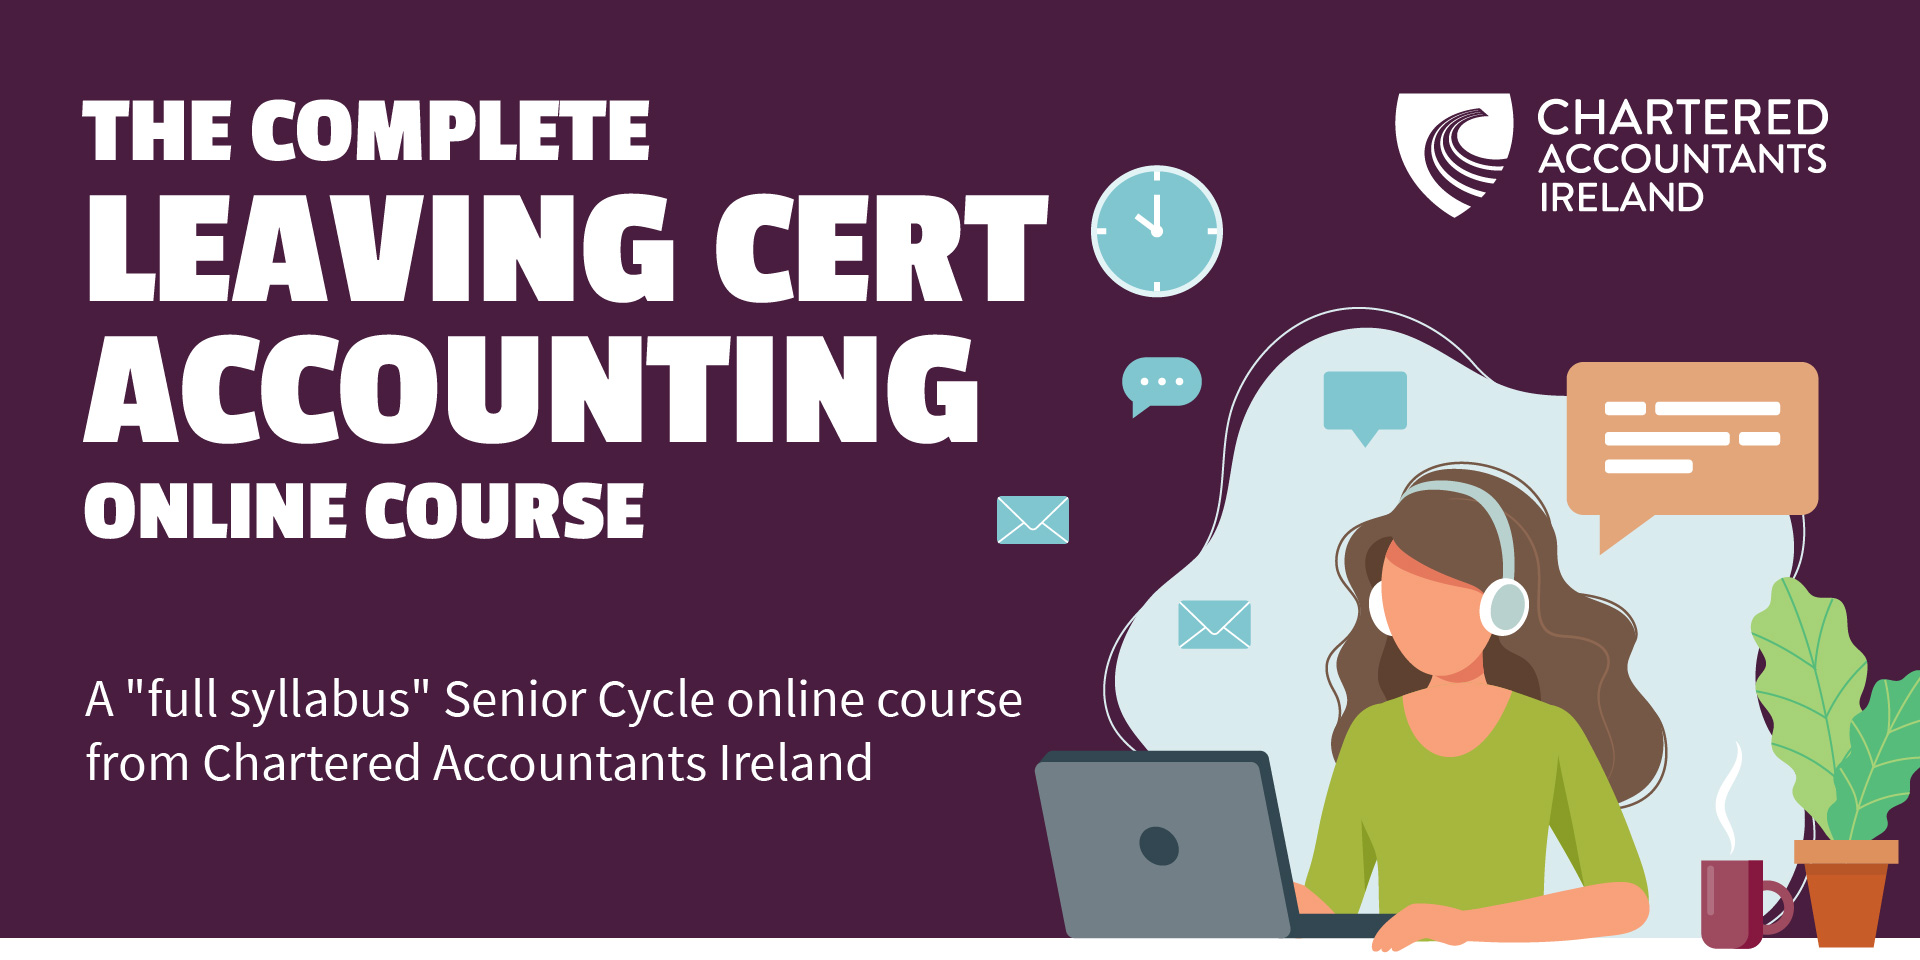 The Complete Leaving Cert Accounting Online Course: A &quot;full syllabus&quot; Senior Cycle online course  from Chartered Accountants Ireland